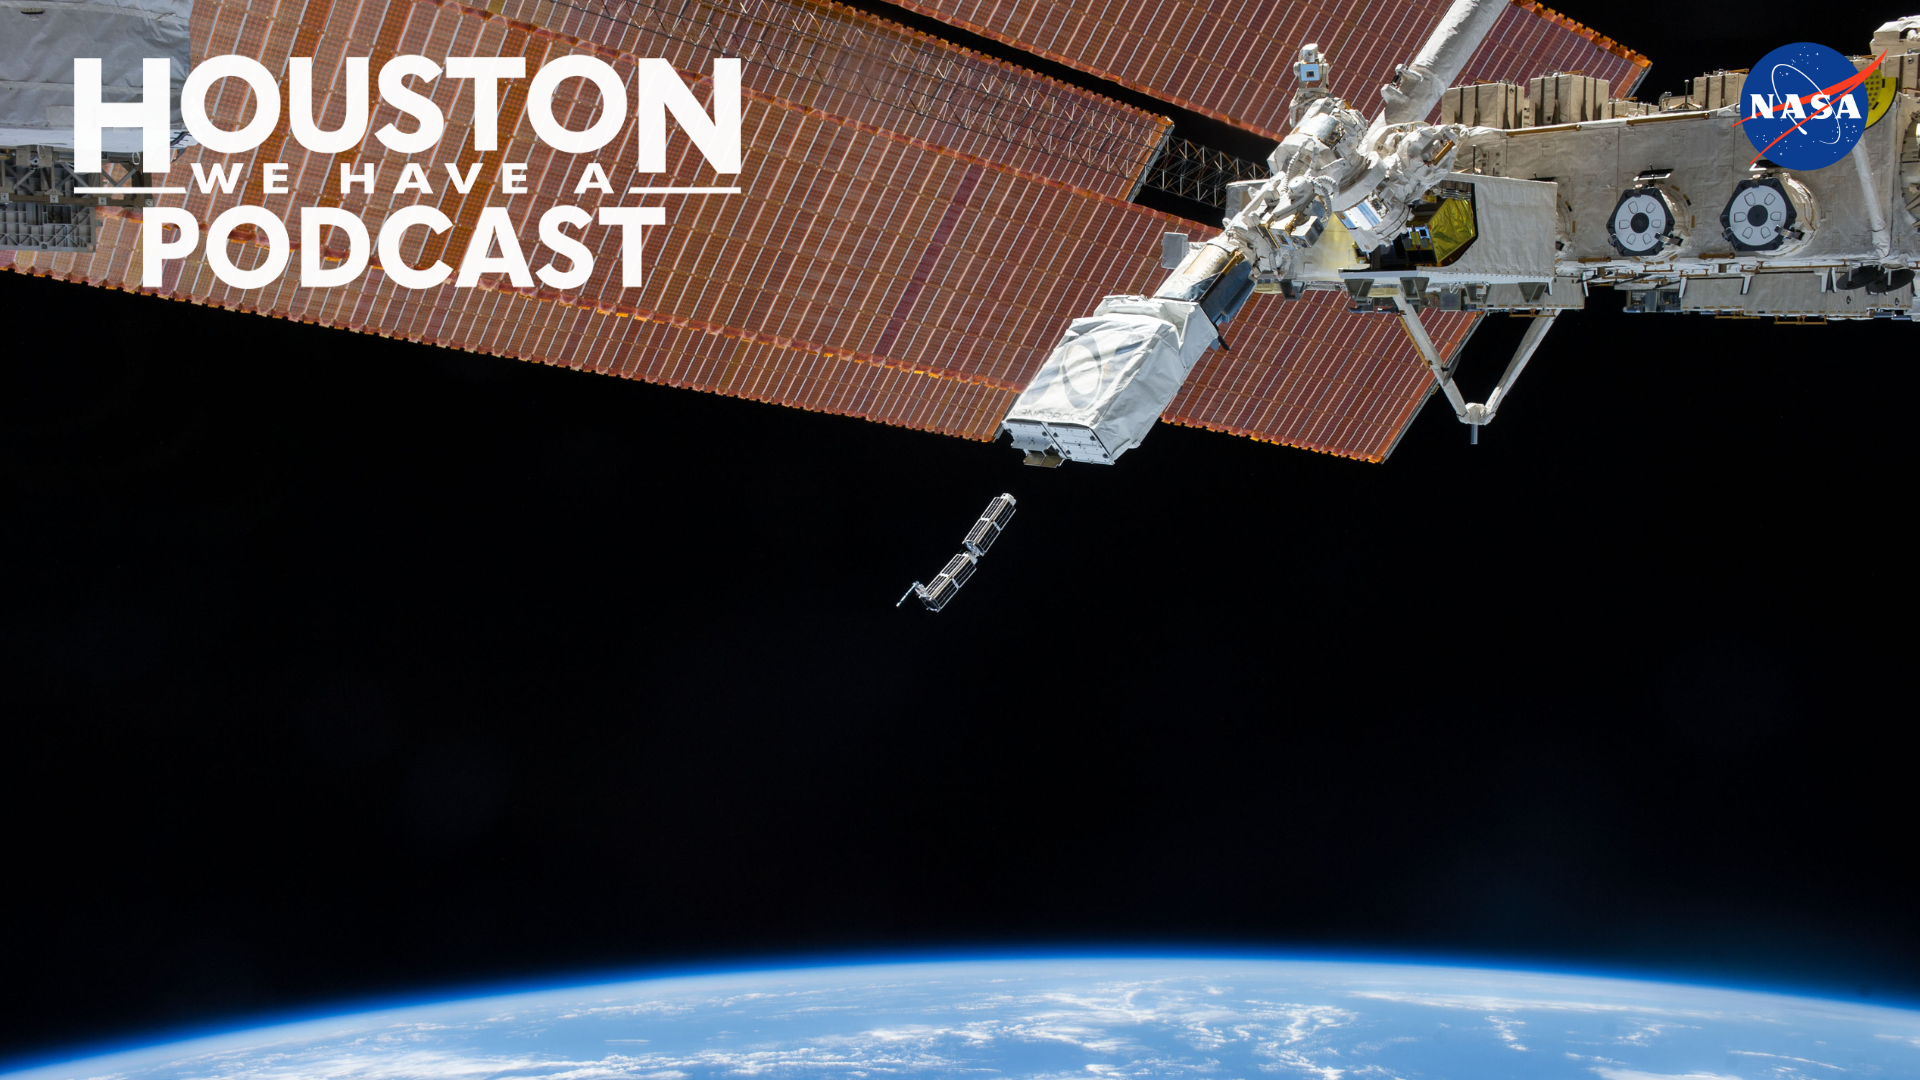 Houston We Have a Podcast Episode 335: Small Payloads, Big Science